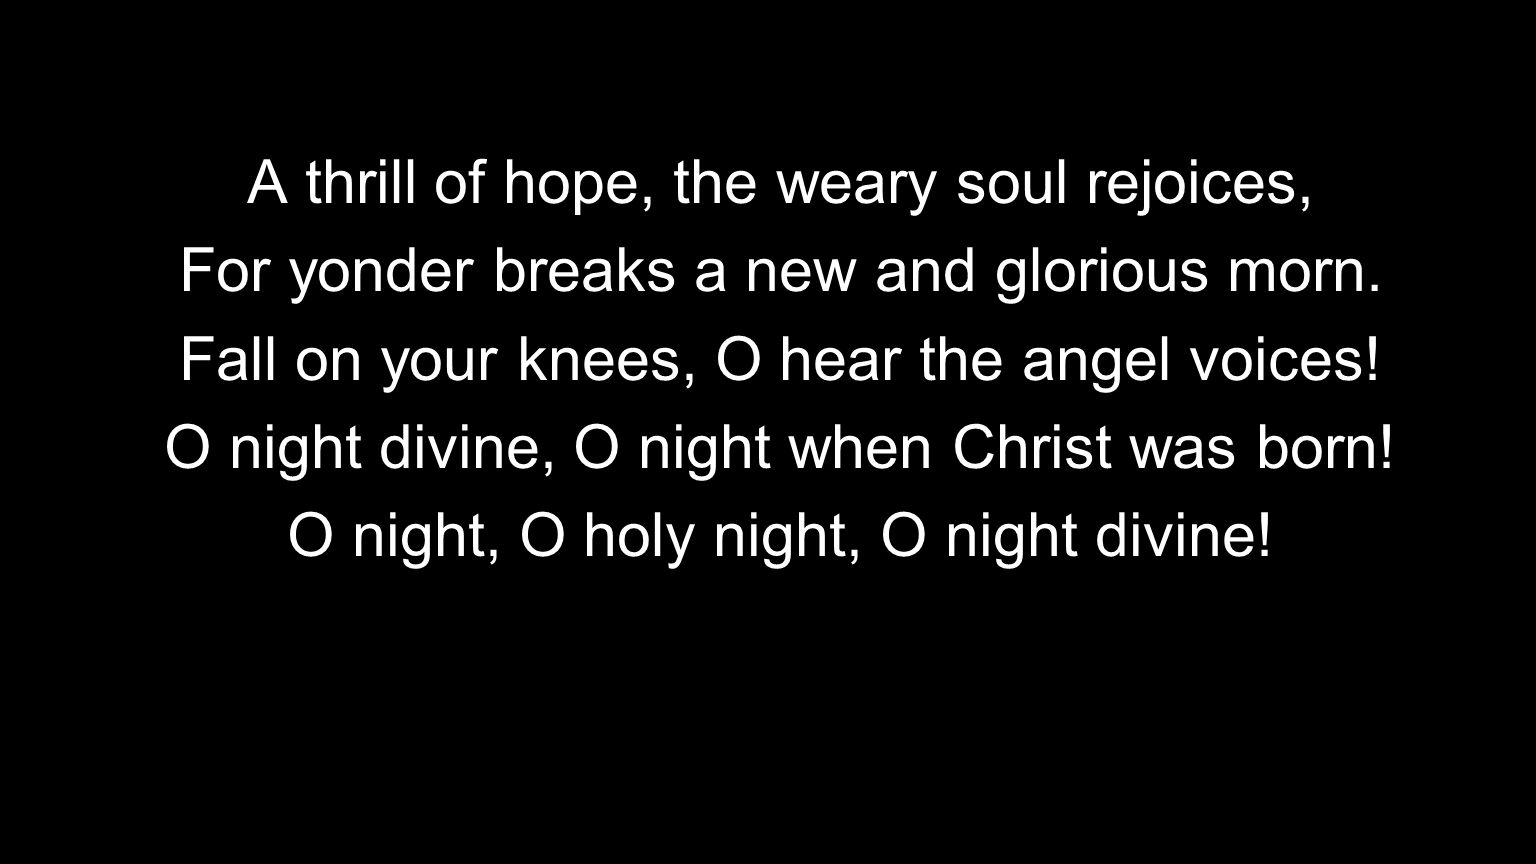 A thrill of hope, the weary soul rejoices,